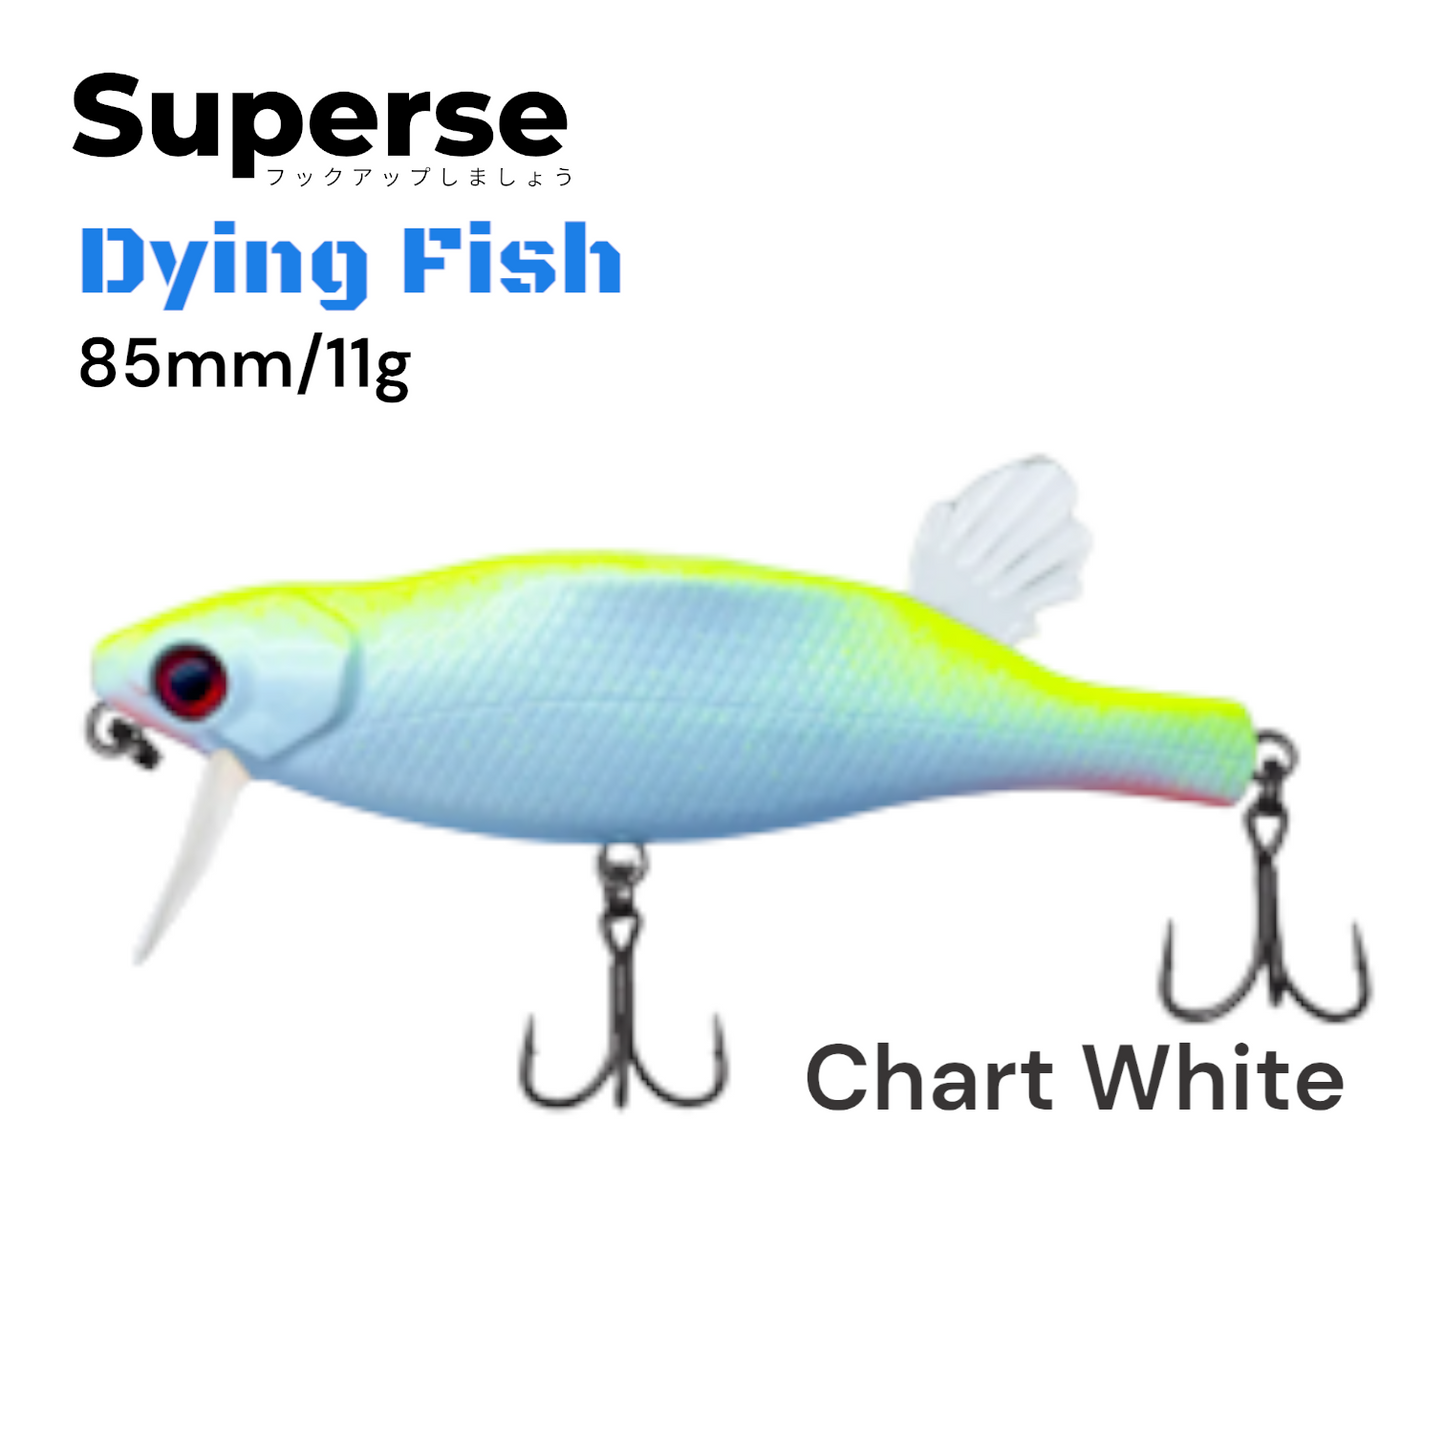 Superse Dying Fish M704